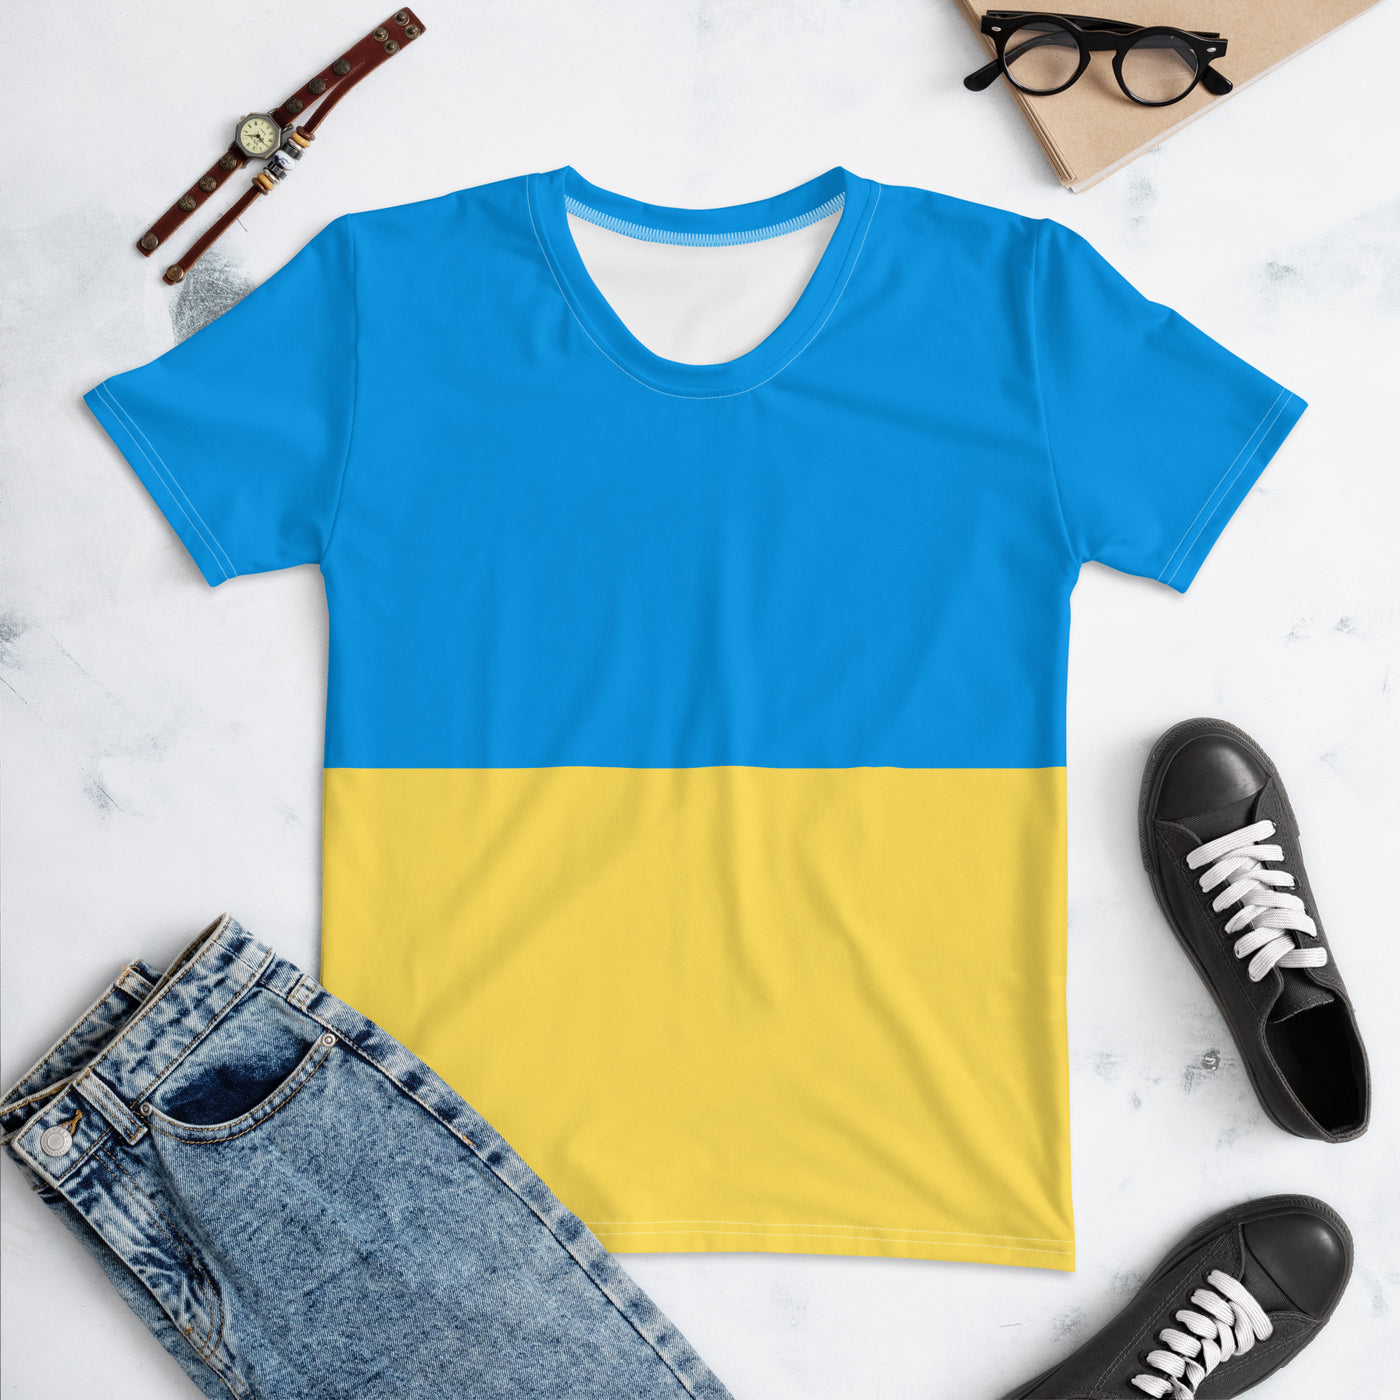 All Over Blue & Yellow Women's Tee